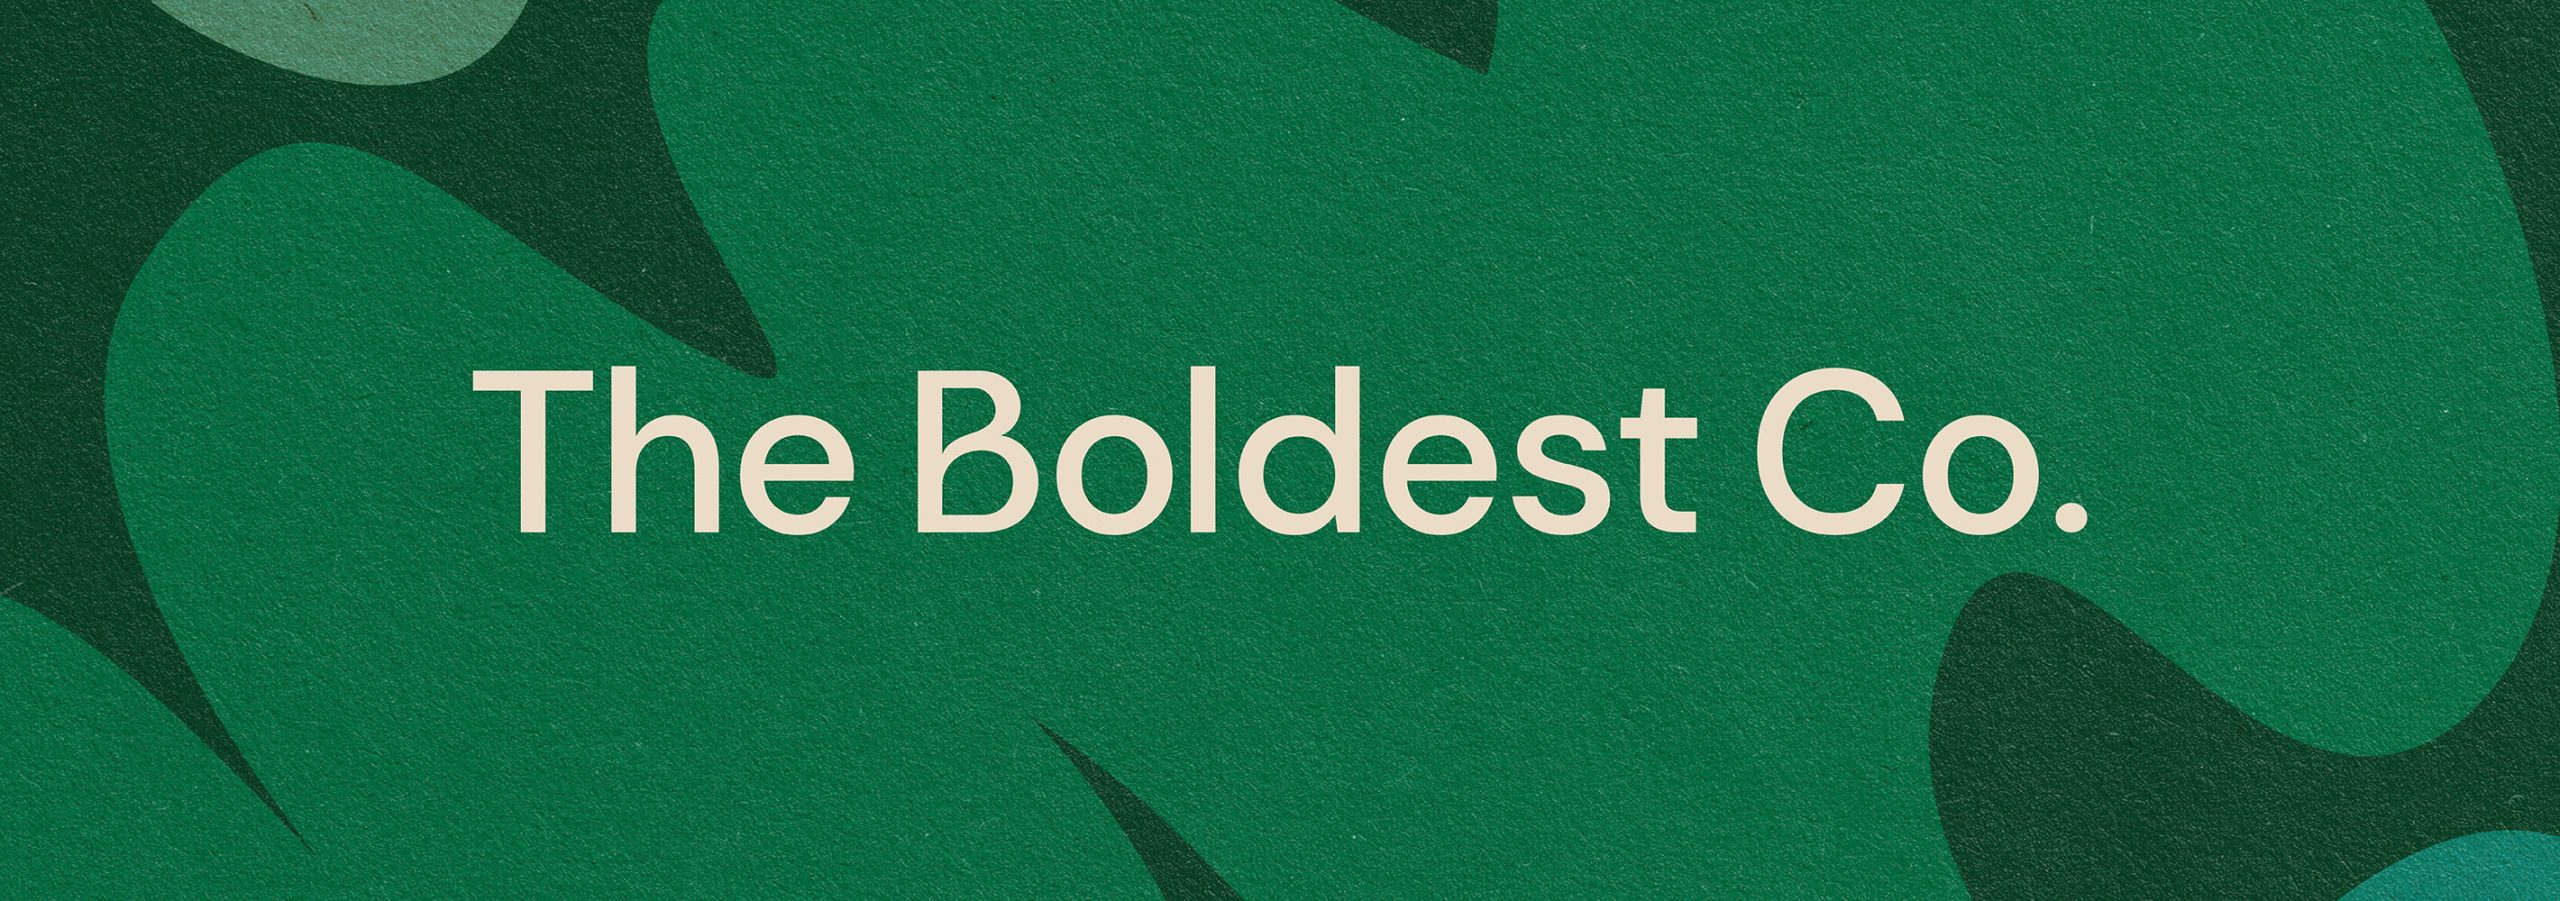 The Boldest Co logo sits on a green blob pattern background. The logo is a clean sans serif and features a slightly curvy ‘B’.